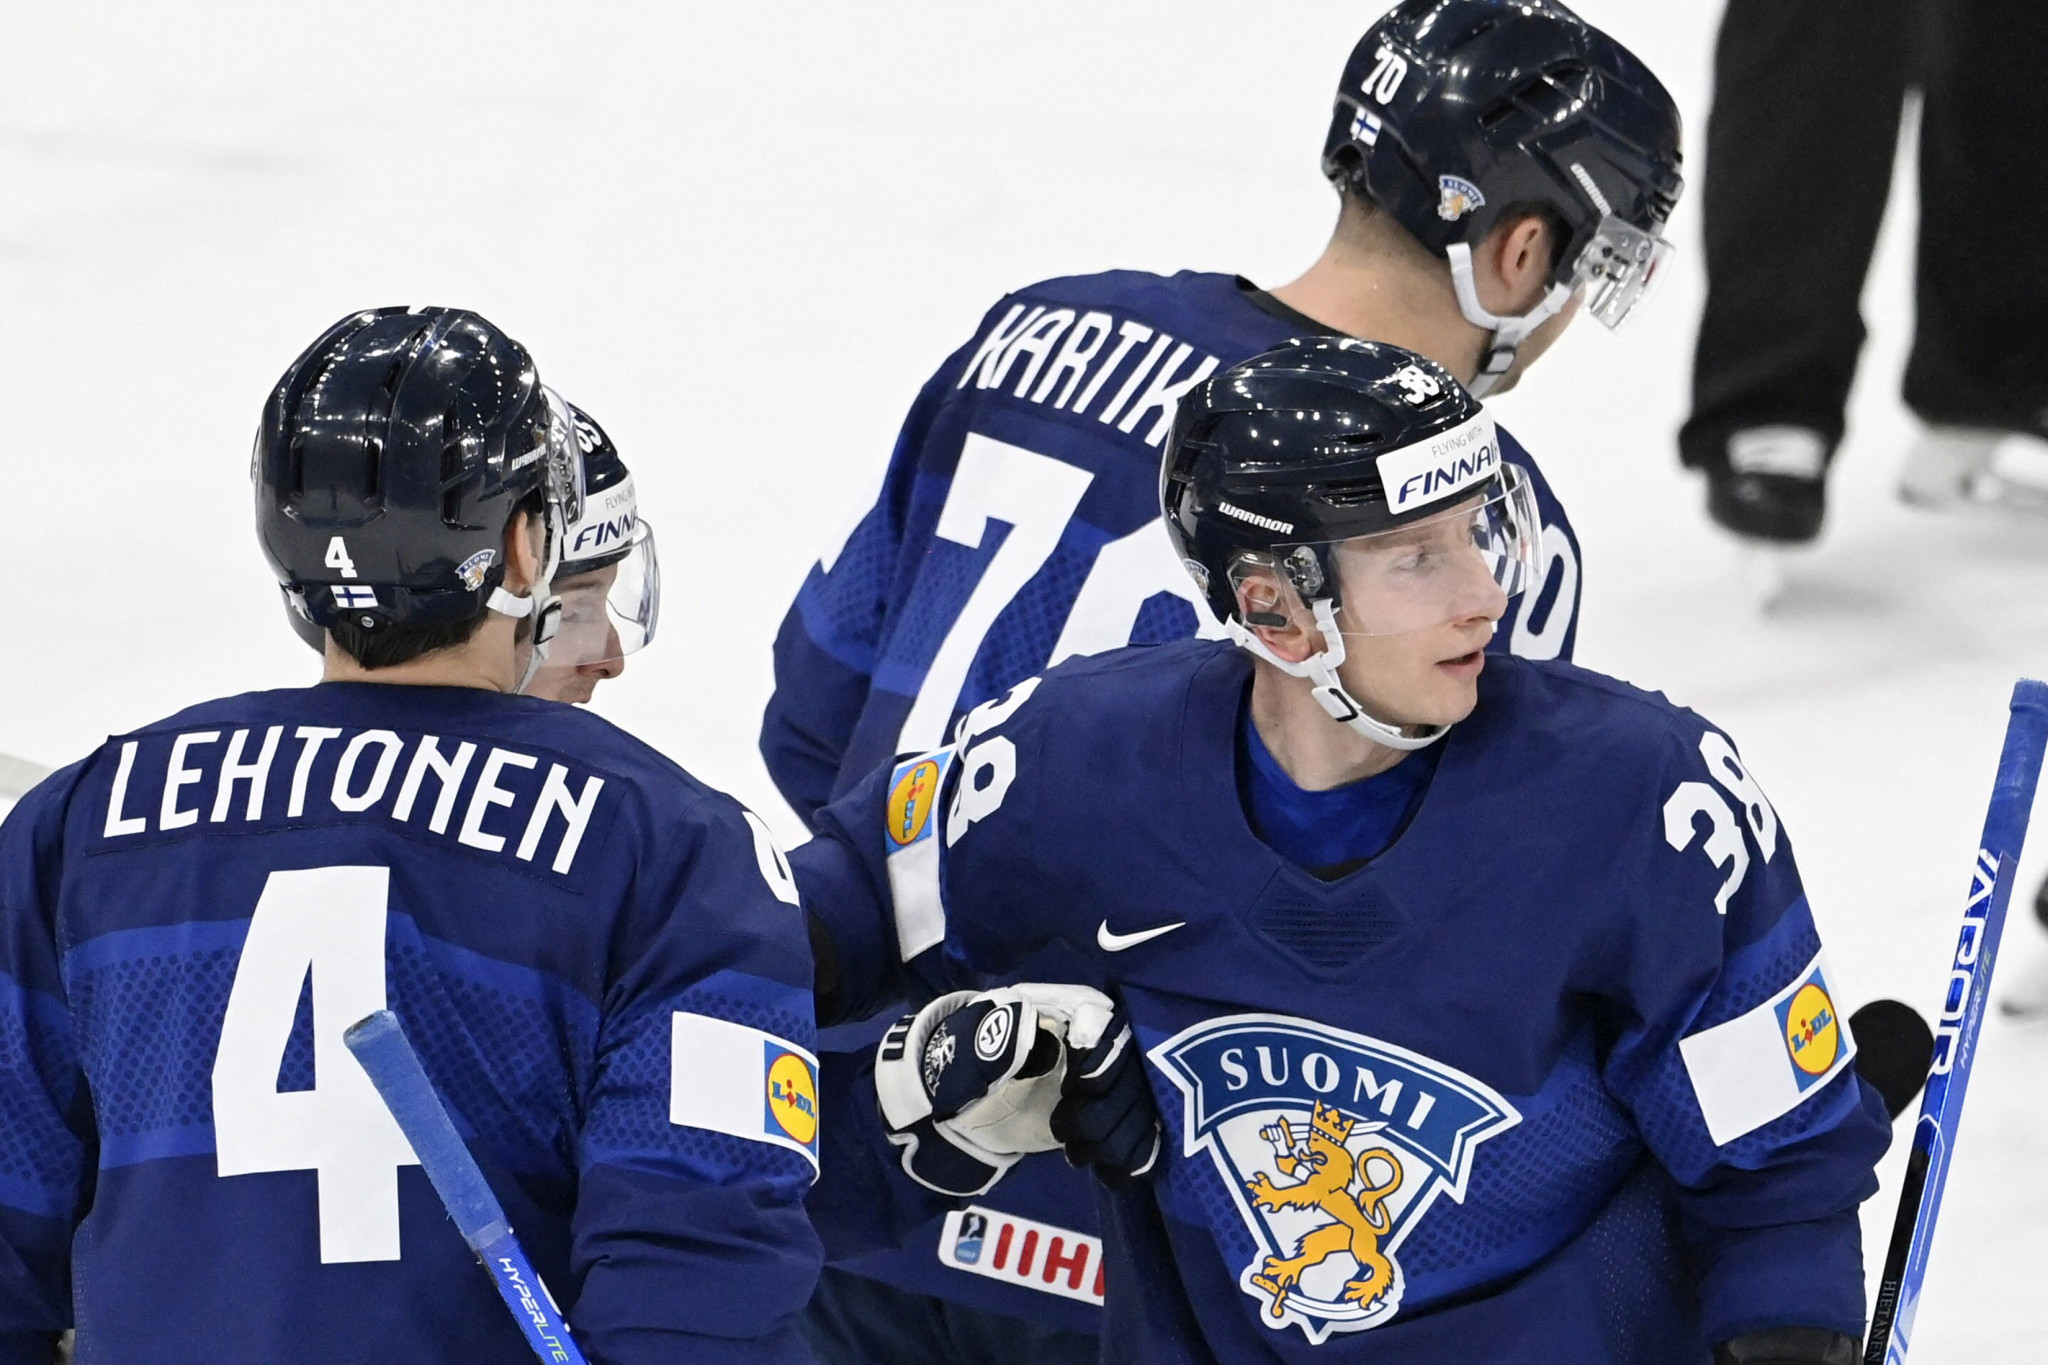 Finland ran riot against Britain in their IIHF World Championships matchup ©Getty Images